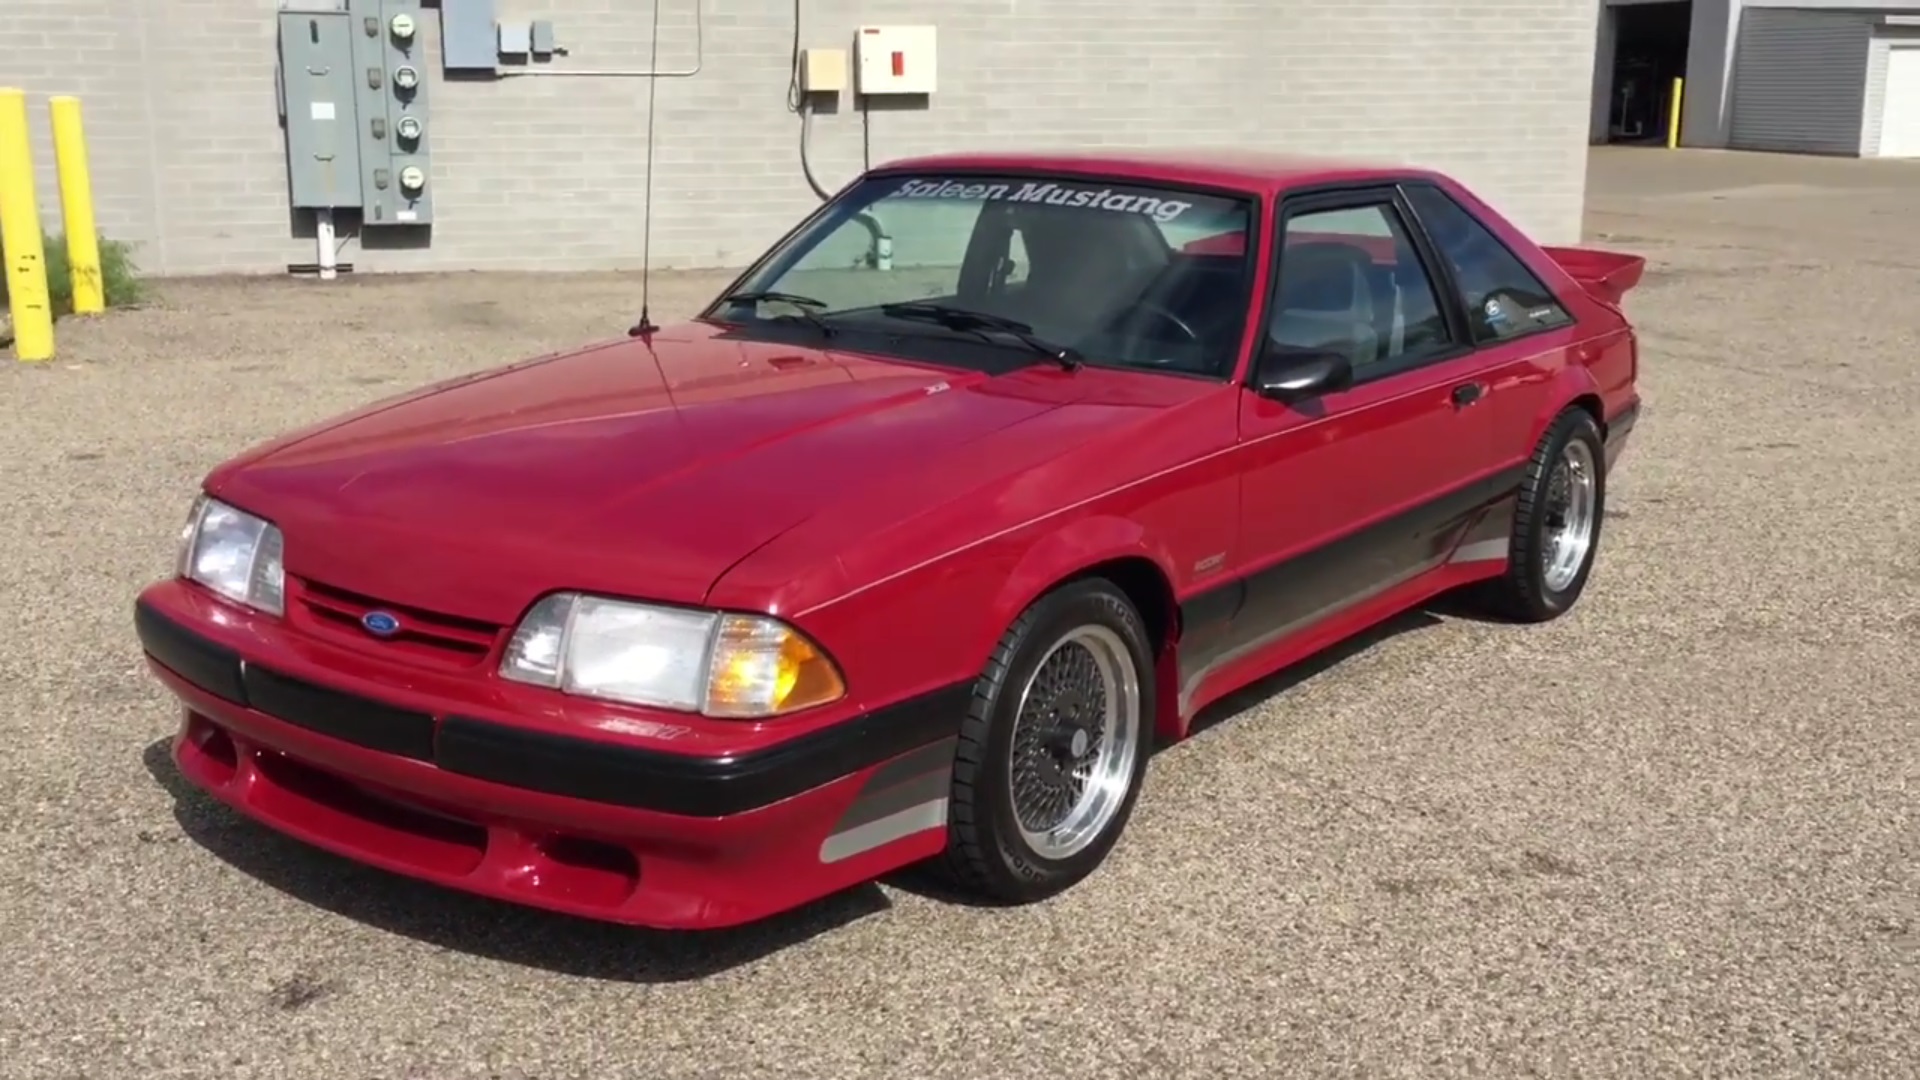 Video: 1988 Ford Saleen Mustang Full Tour